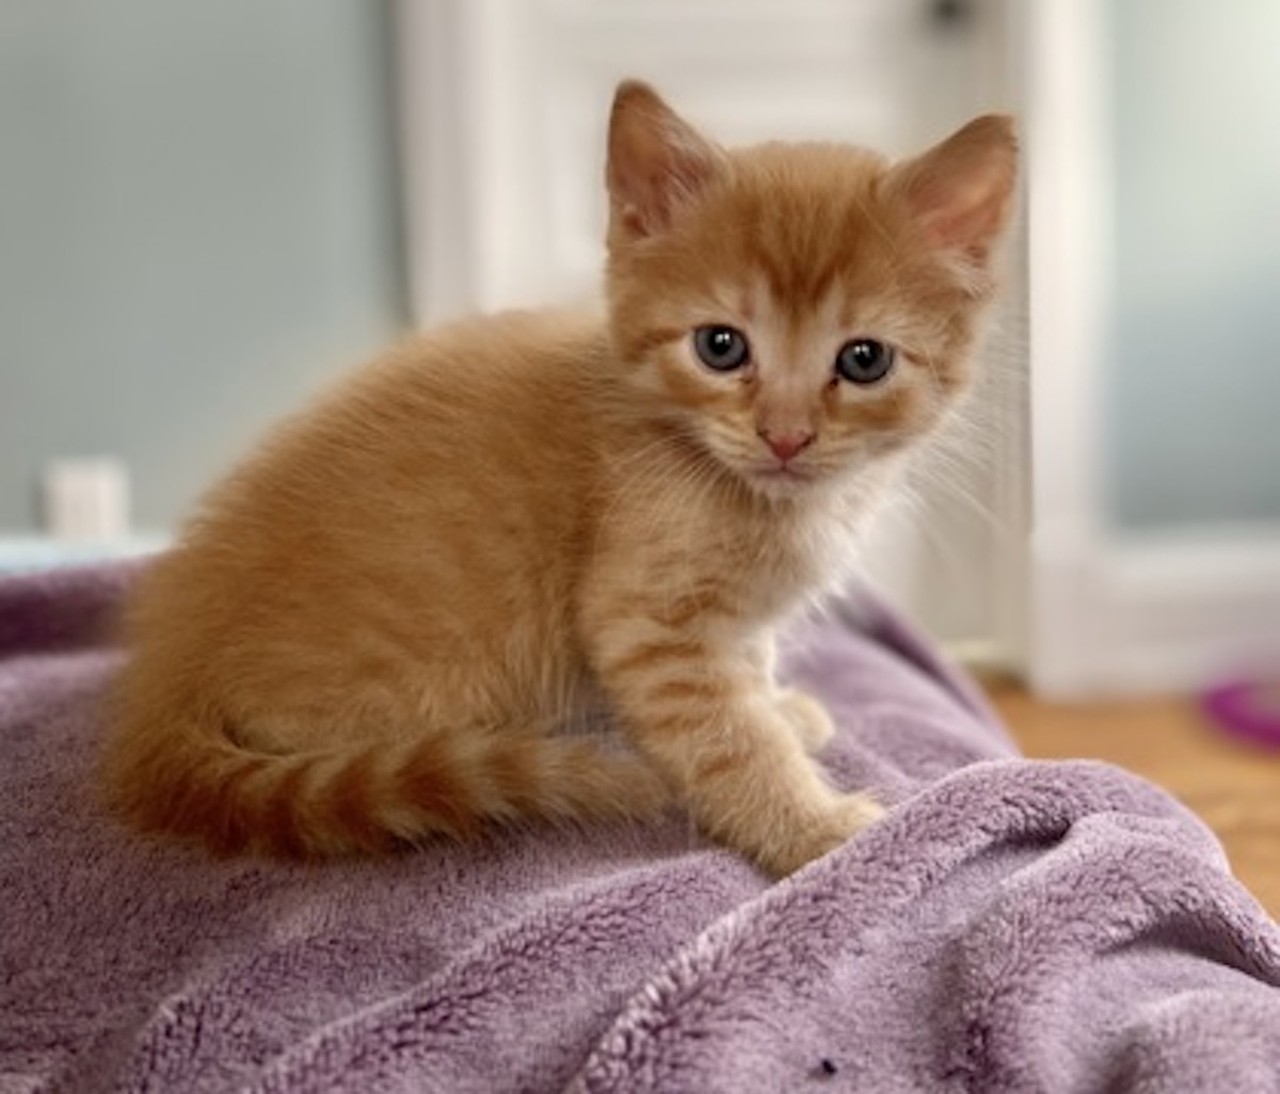 Perseus
Cincinnati Animal CARE
“Meet Perseus! This loyal boy is 2 months old and ready to find his future family! Come by Cincinnati Animal CARE’s booth at My Furry Valentine to meet him.”